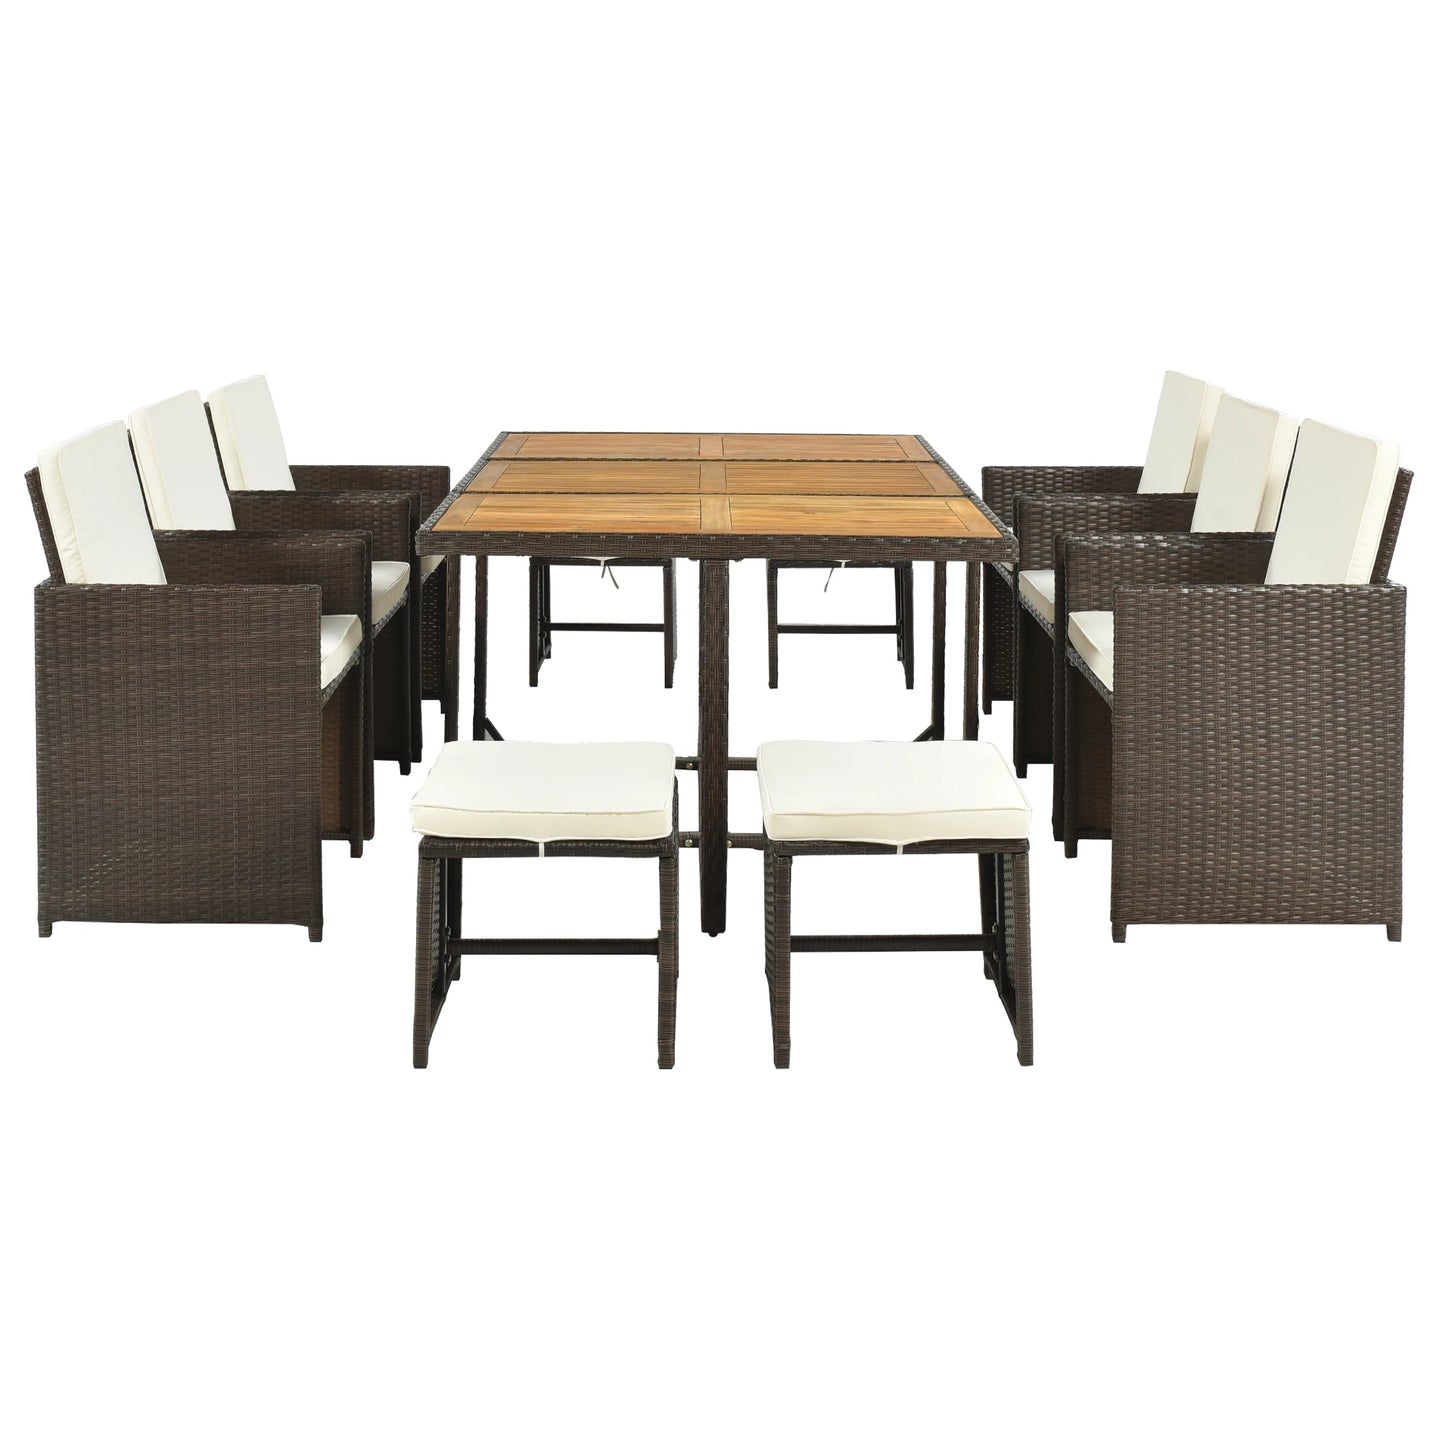 11-Piece Patio Furniture Set Wicker with Wood Tabletop for 10 Brown Rattan +Beige Cushion